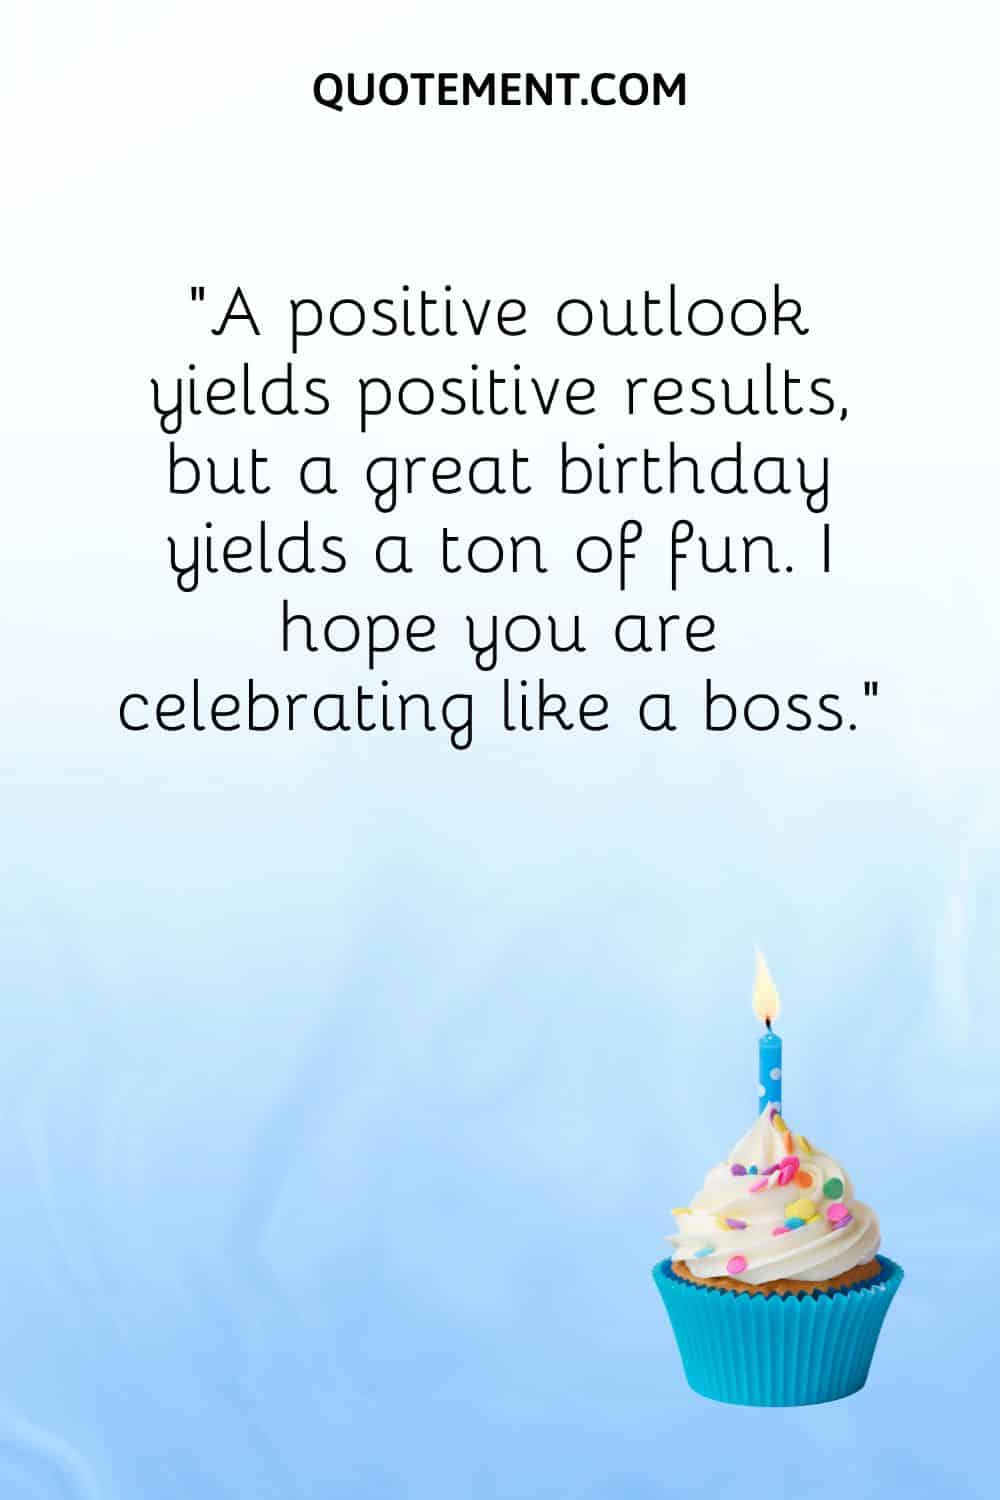 “A positive outlook yields positive results, but a great birthday yields a ton of fun. I hope you are celebrating like a boss.”